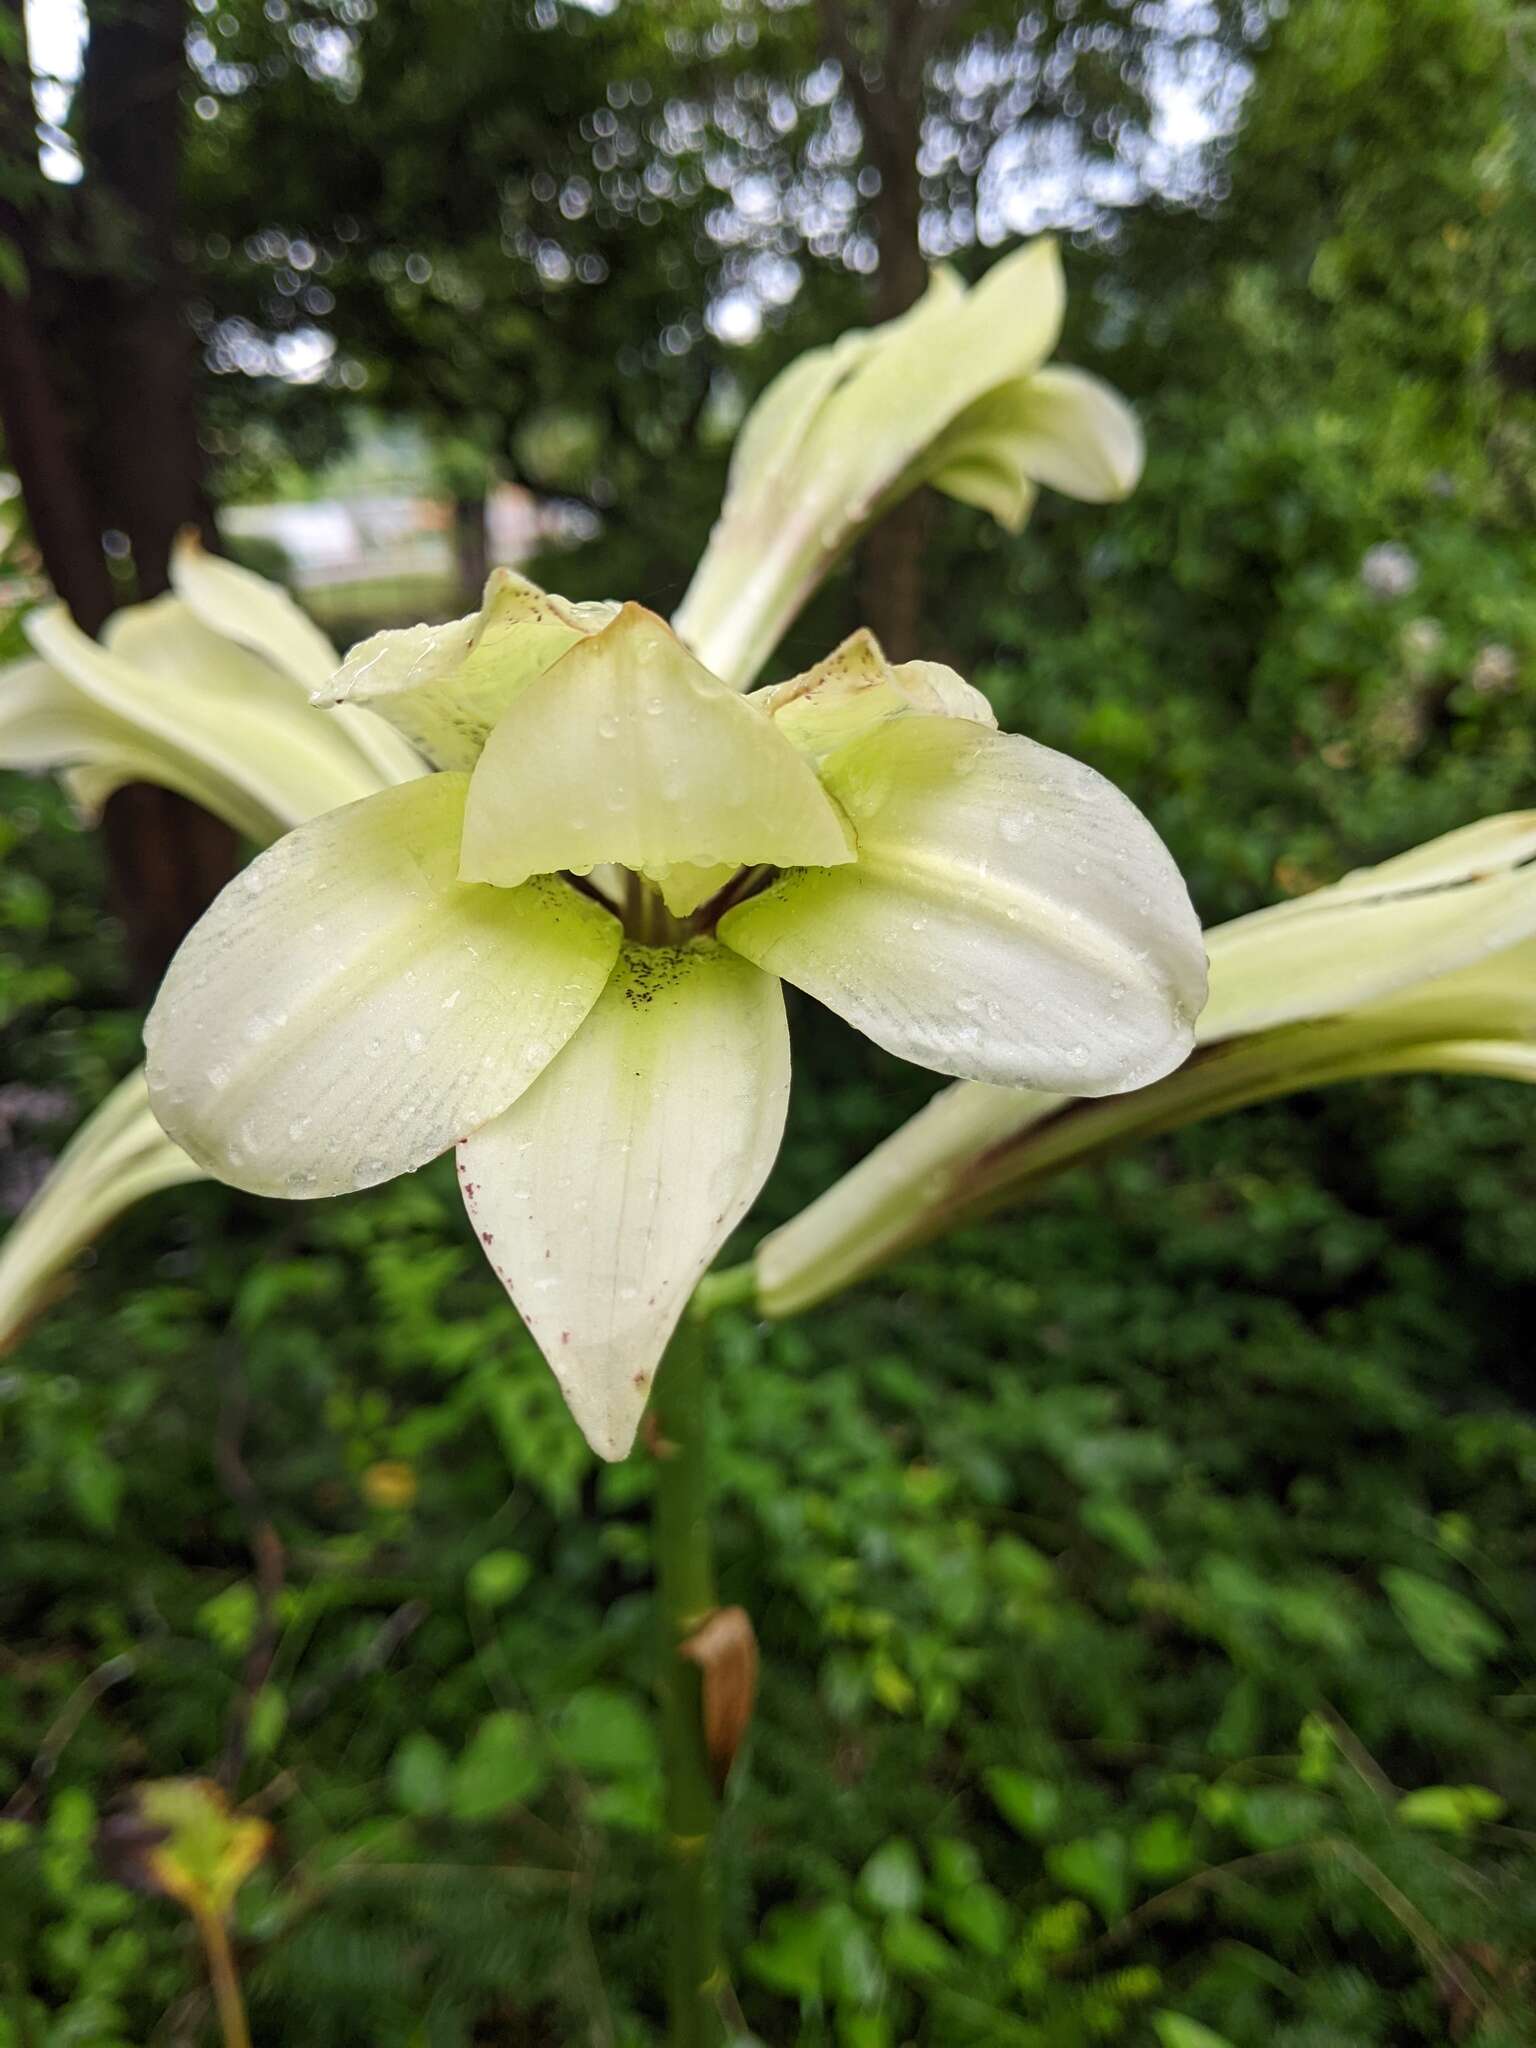 Image of Lily